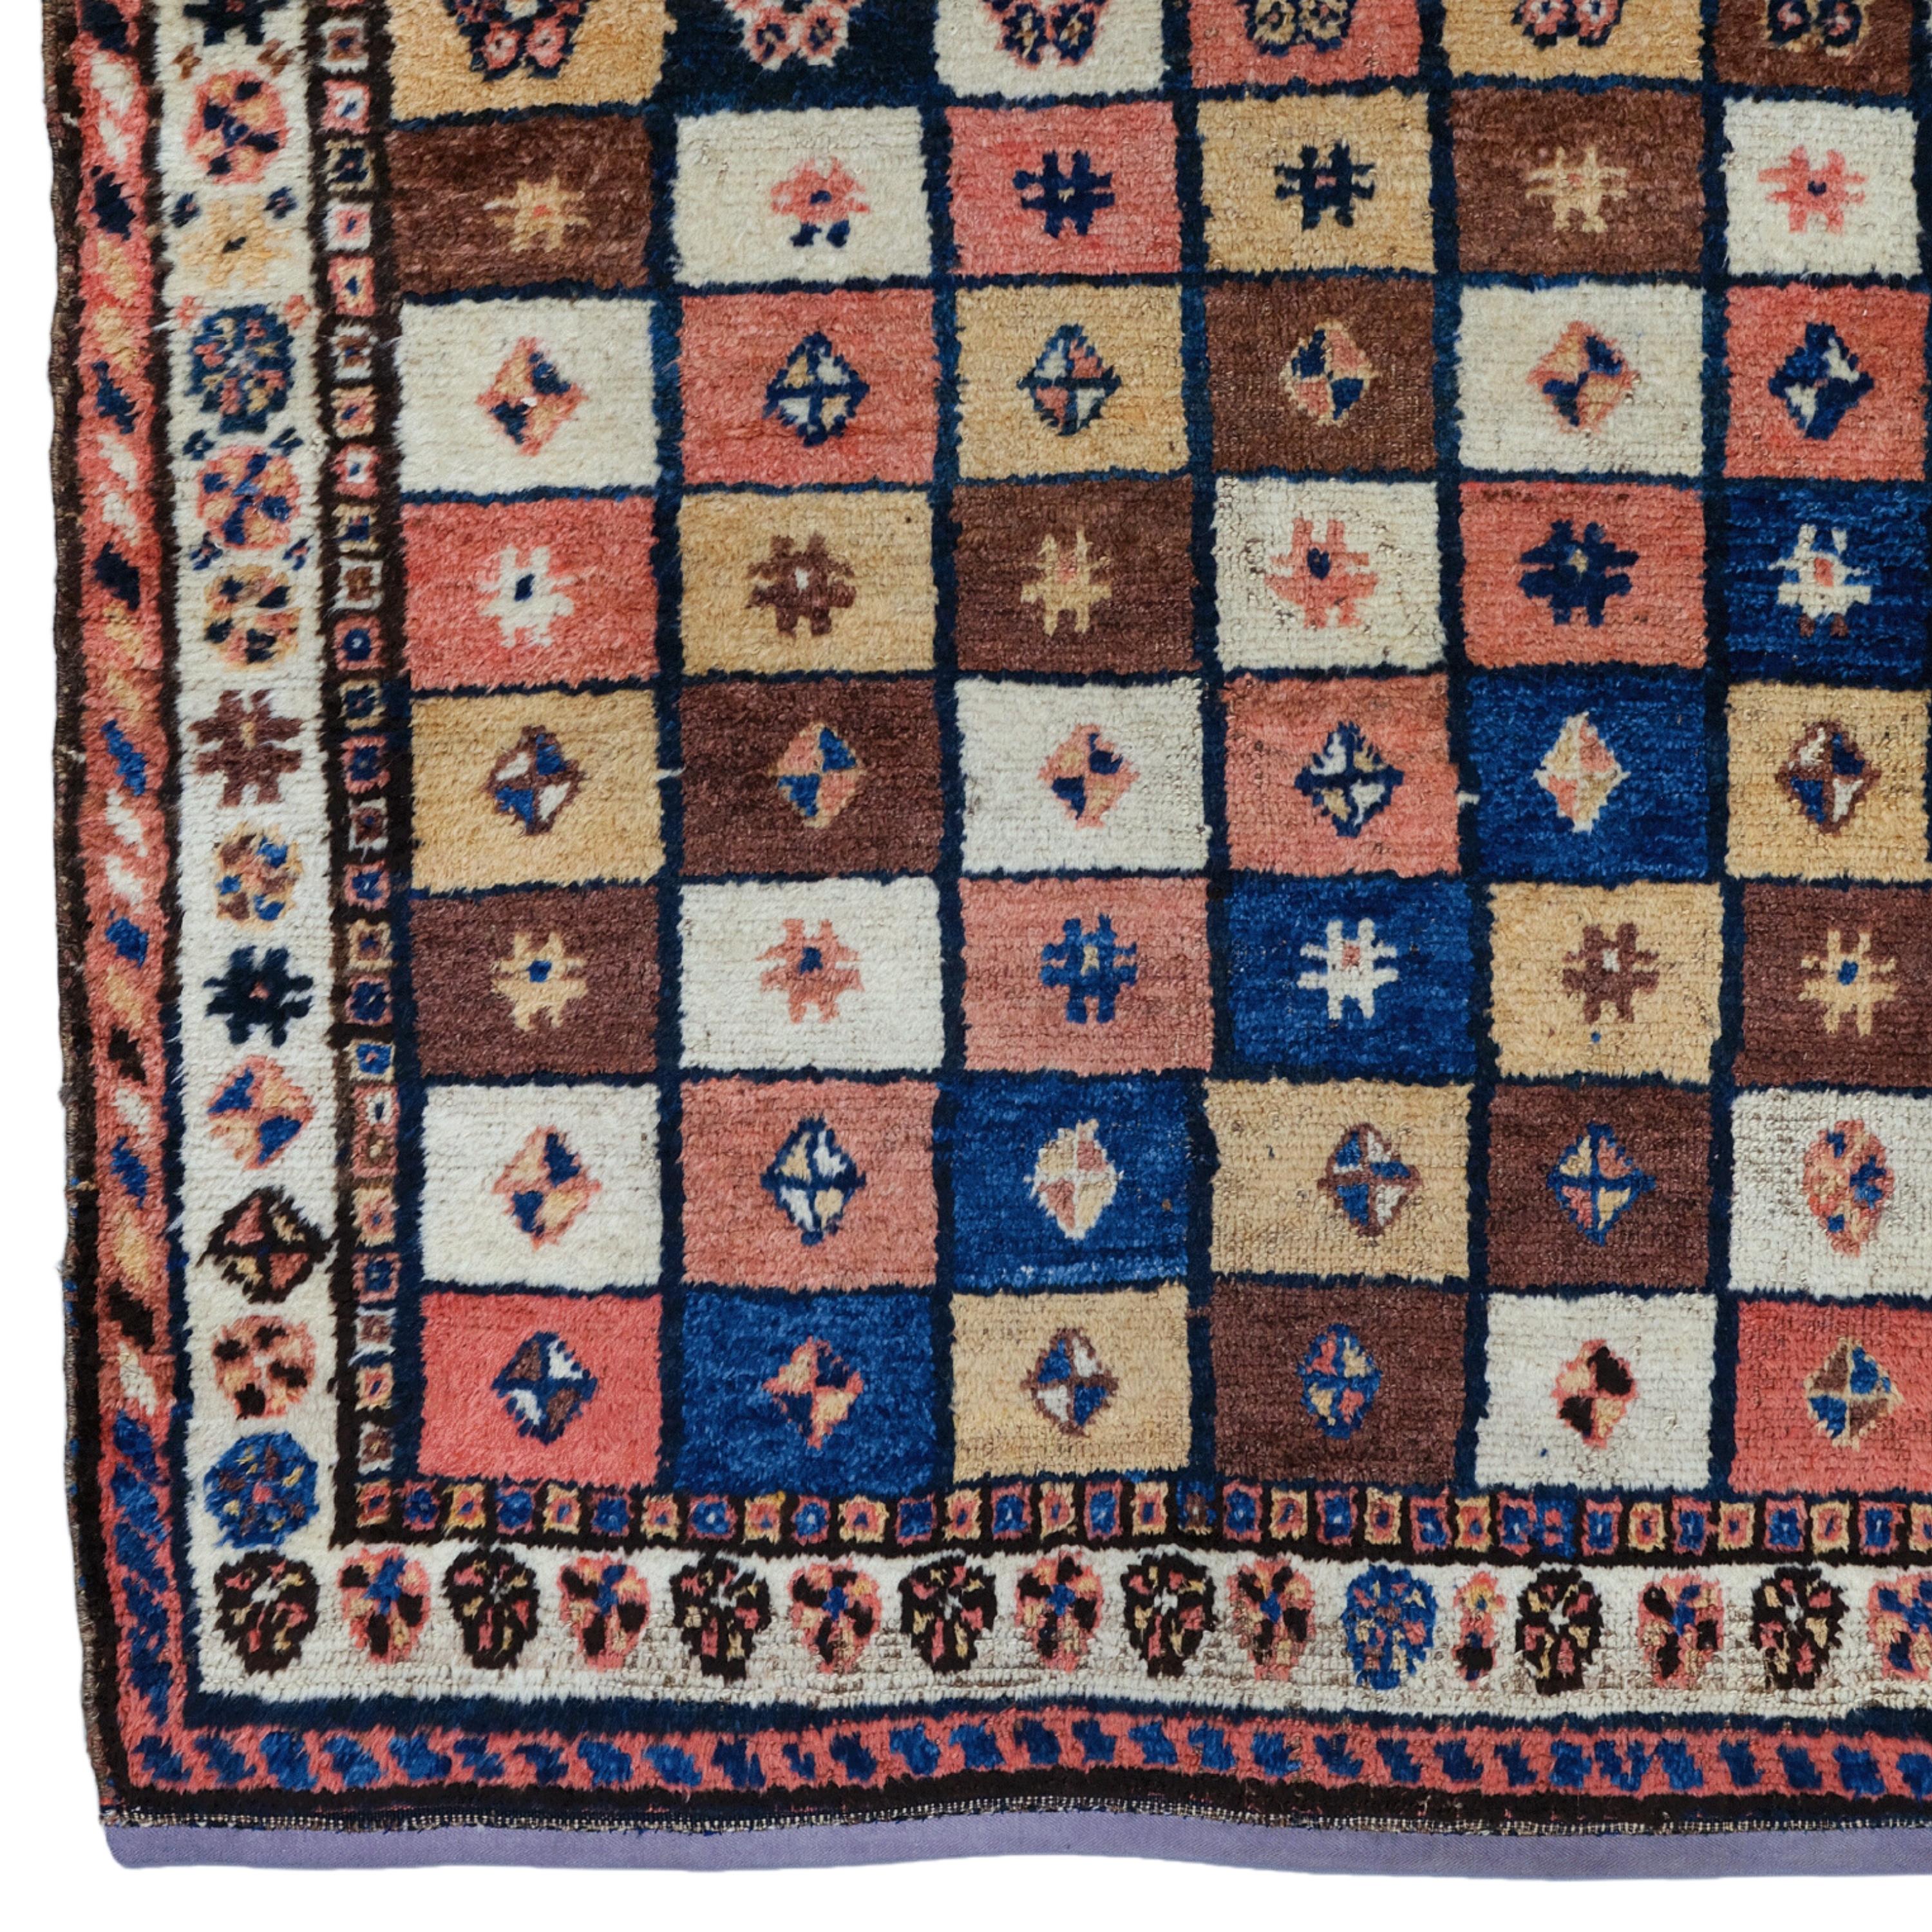 19th Century Gabbeh Rug - Antique Handwoven Rug

This elegant 19th century Gabbeh rug will add an authentic touch to your space with its historical texture and rich color palette. This handmade work, measuring 130x175 cm, has been designed to